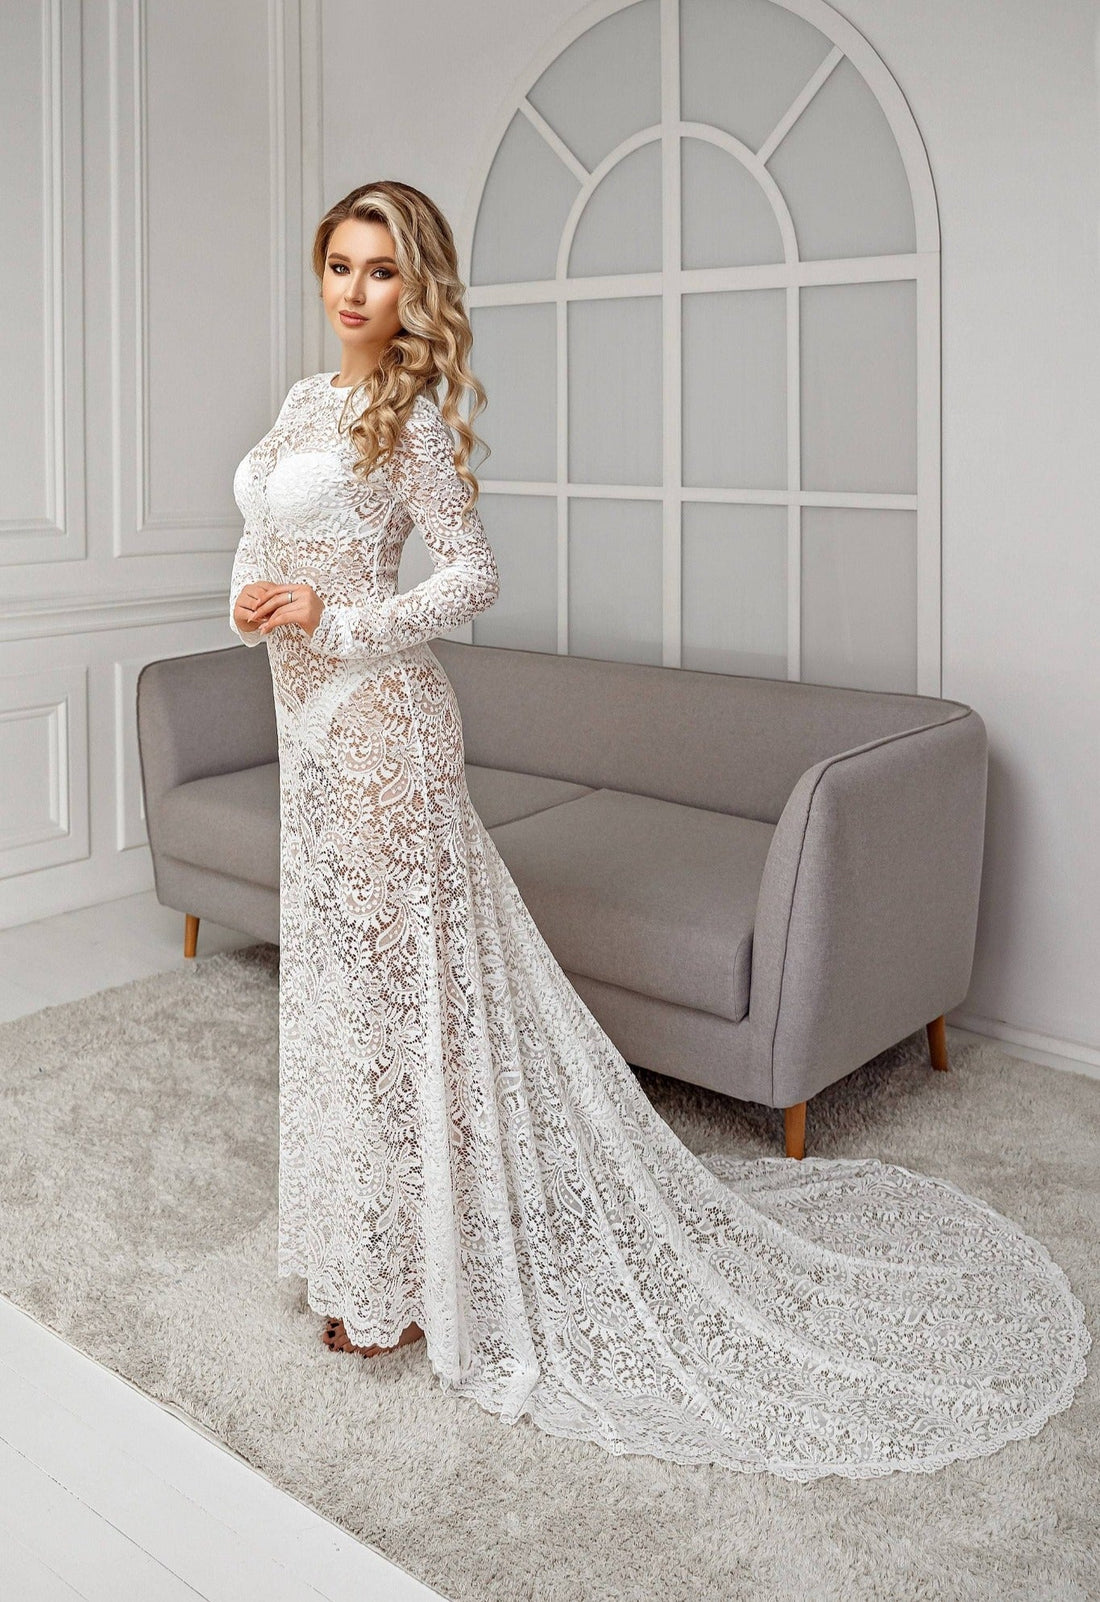 Lace boudoir dress with long sleeves and train